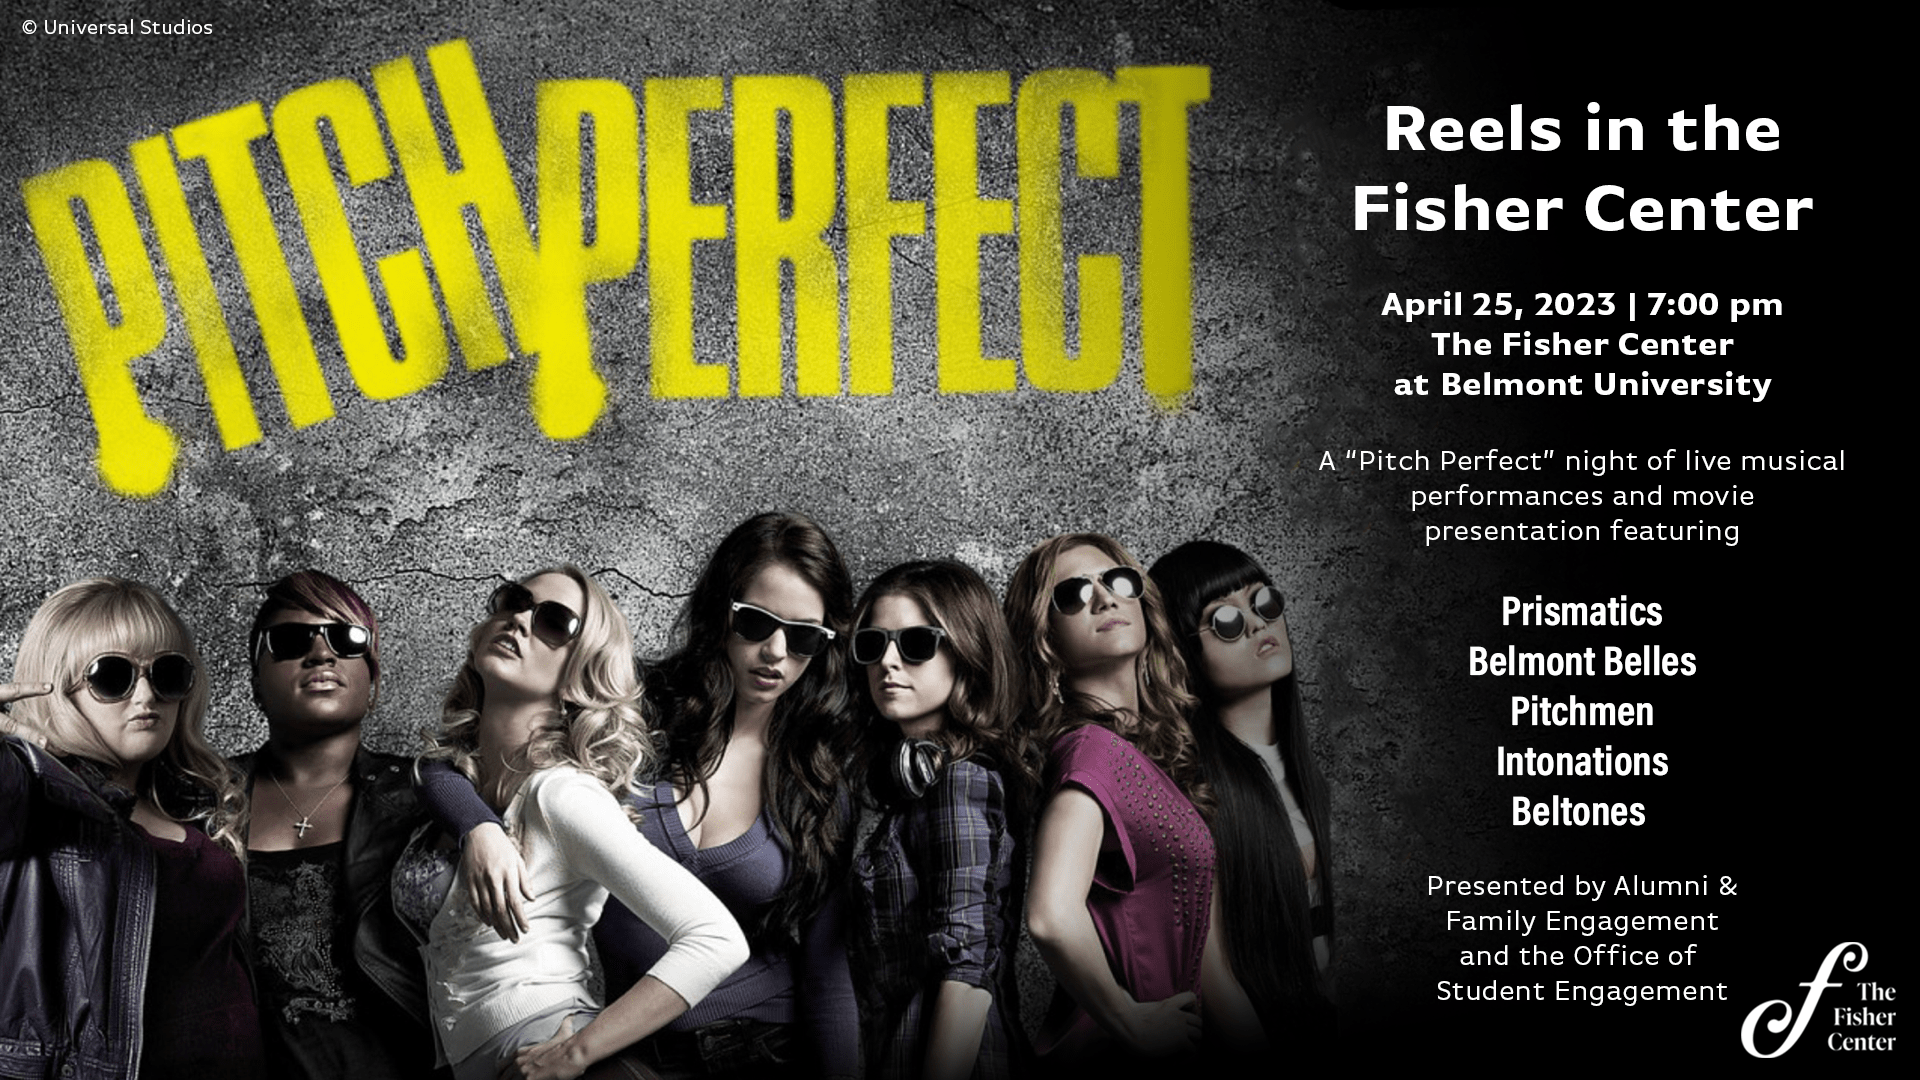 Reels in the Fisher Center Pitch Perfect on April 25